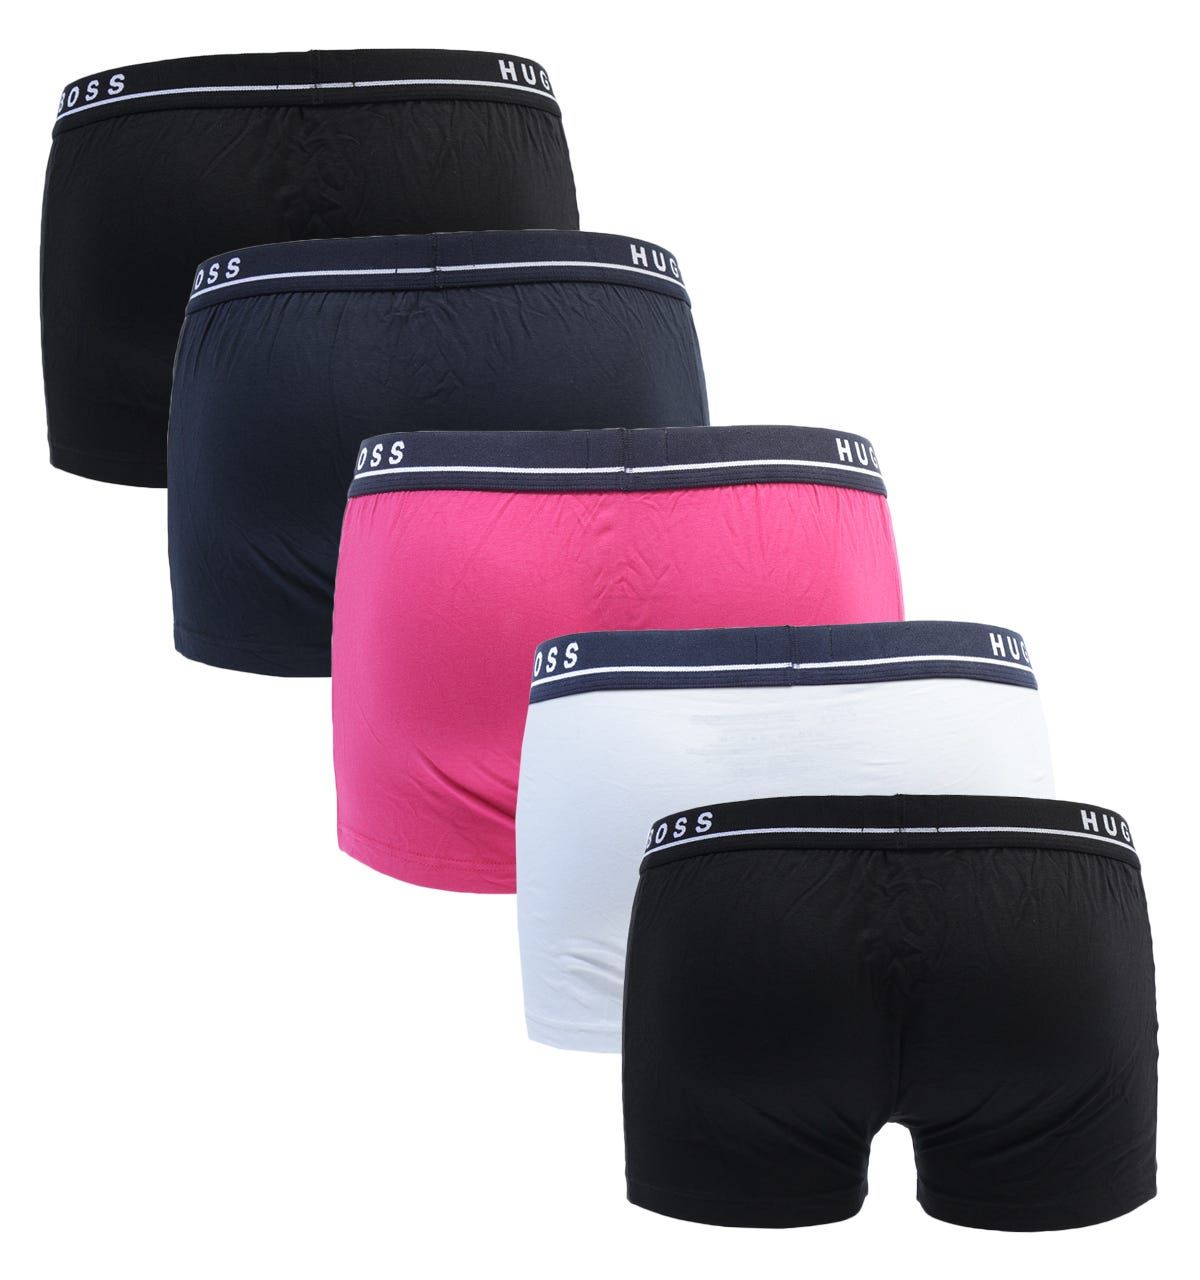 This five pack of boxer briefs from BOSS are crafted from super soft and breathable stretch cotton. Featuring elasticated waistbands and contrast logo details for a signature finish.Five Pack, Stretch Cotton , Elasticated Waistband, 95% Cotton & 5% Elastane, BOSS Branding.